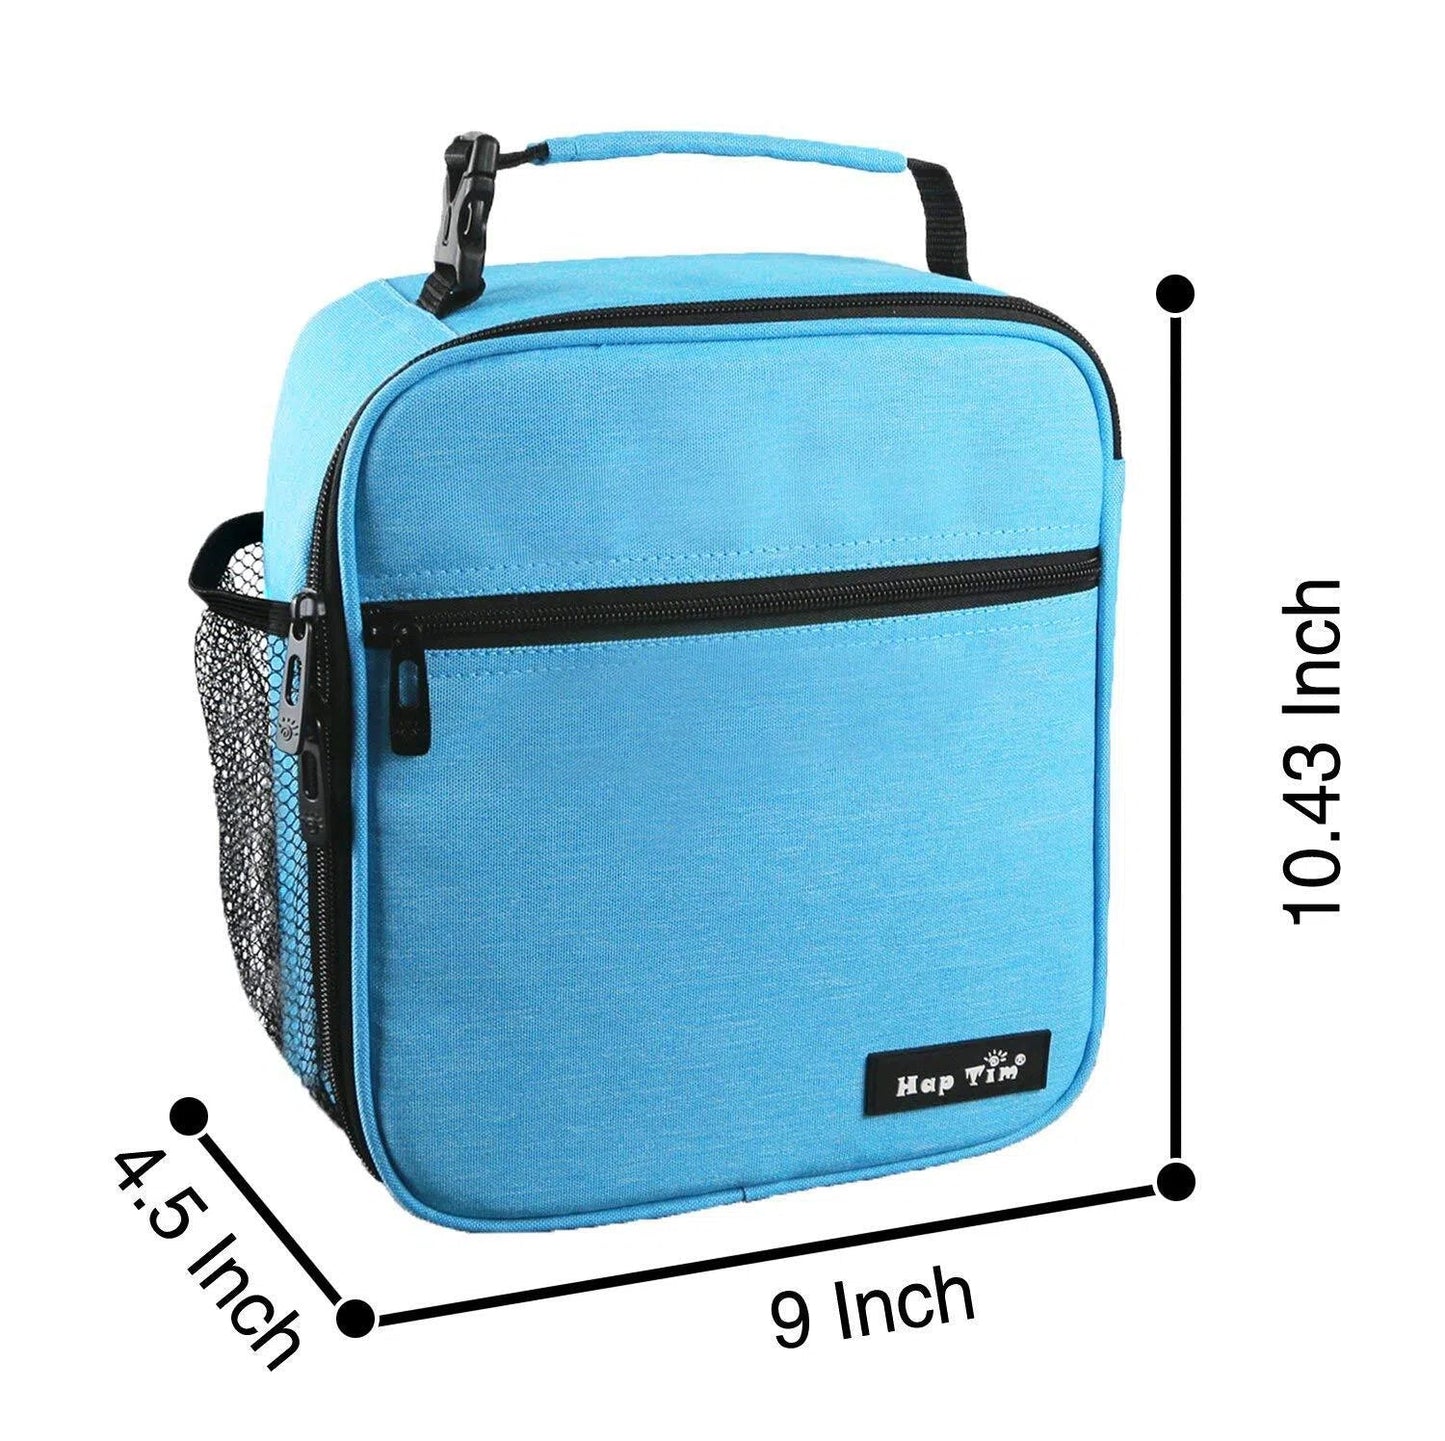 Hap Tim Insulated Lunch Bag for Men Women, Reusable Lunch Box for Kids Boys, Spacious Lunchbox Adult (18654-BL)